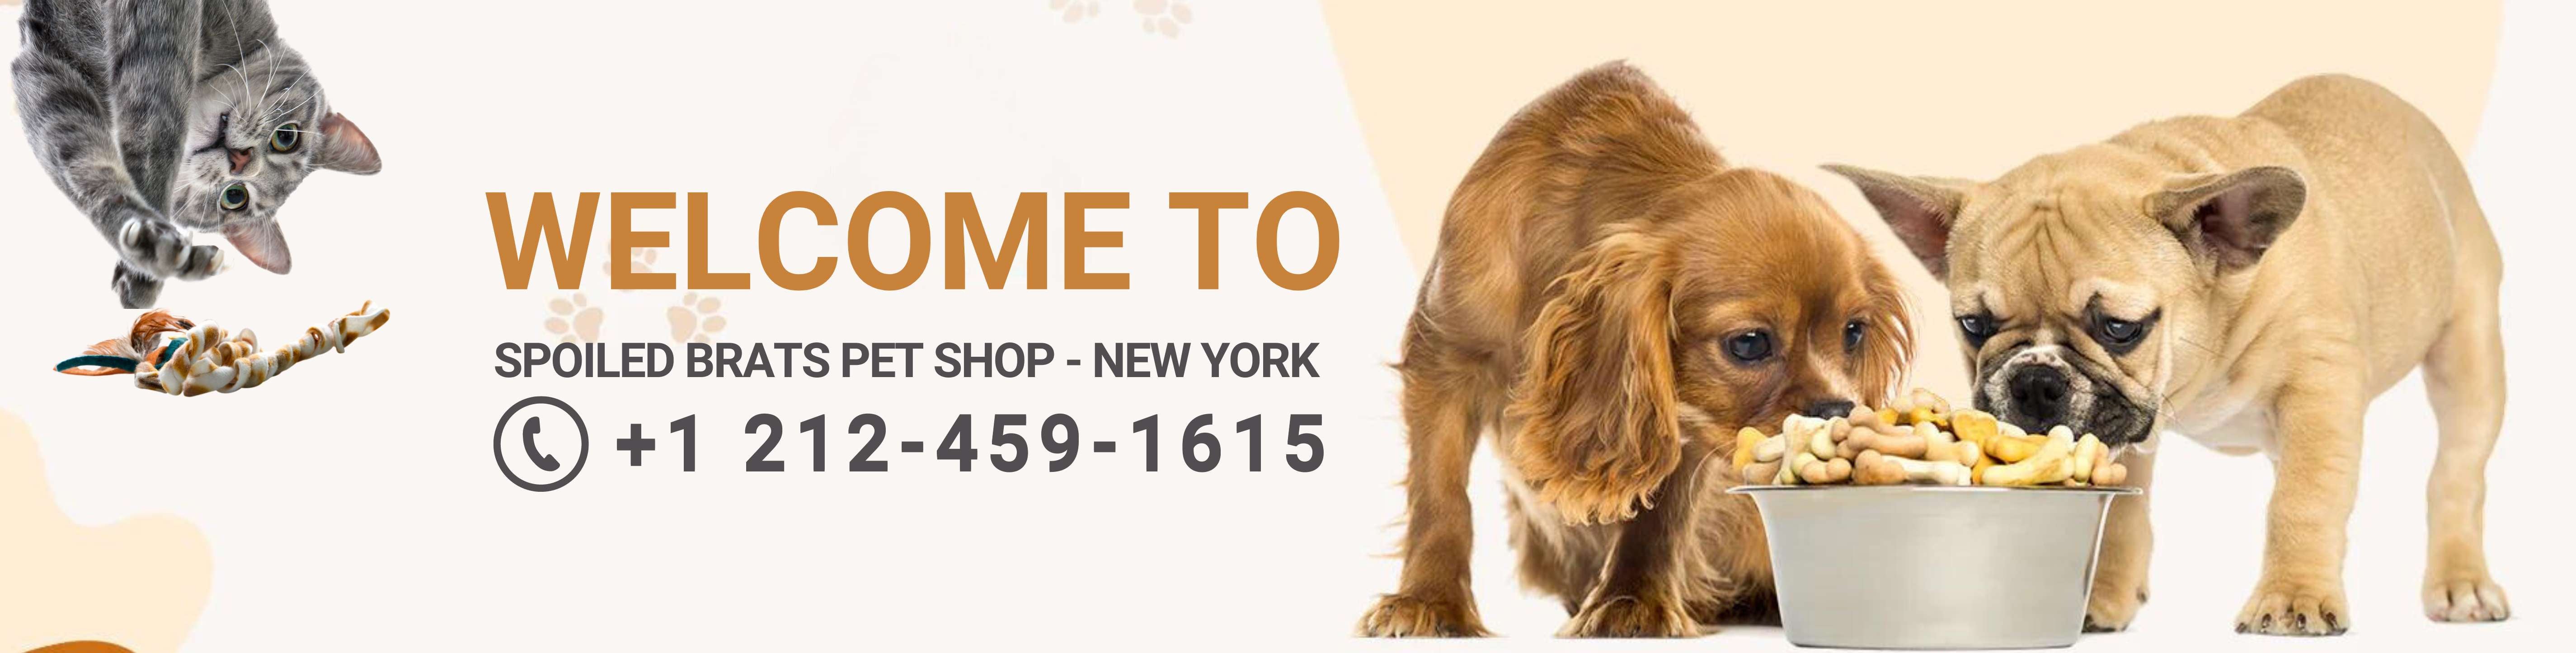 SPOILED BRATS PET SHOP - NEW YORK - Pet Store in New York, Pets Store Near Me